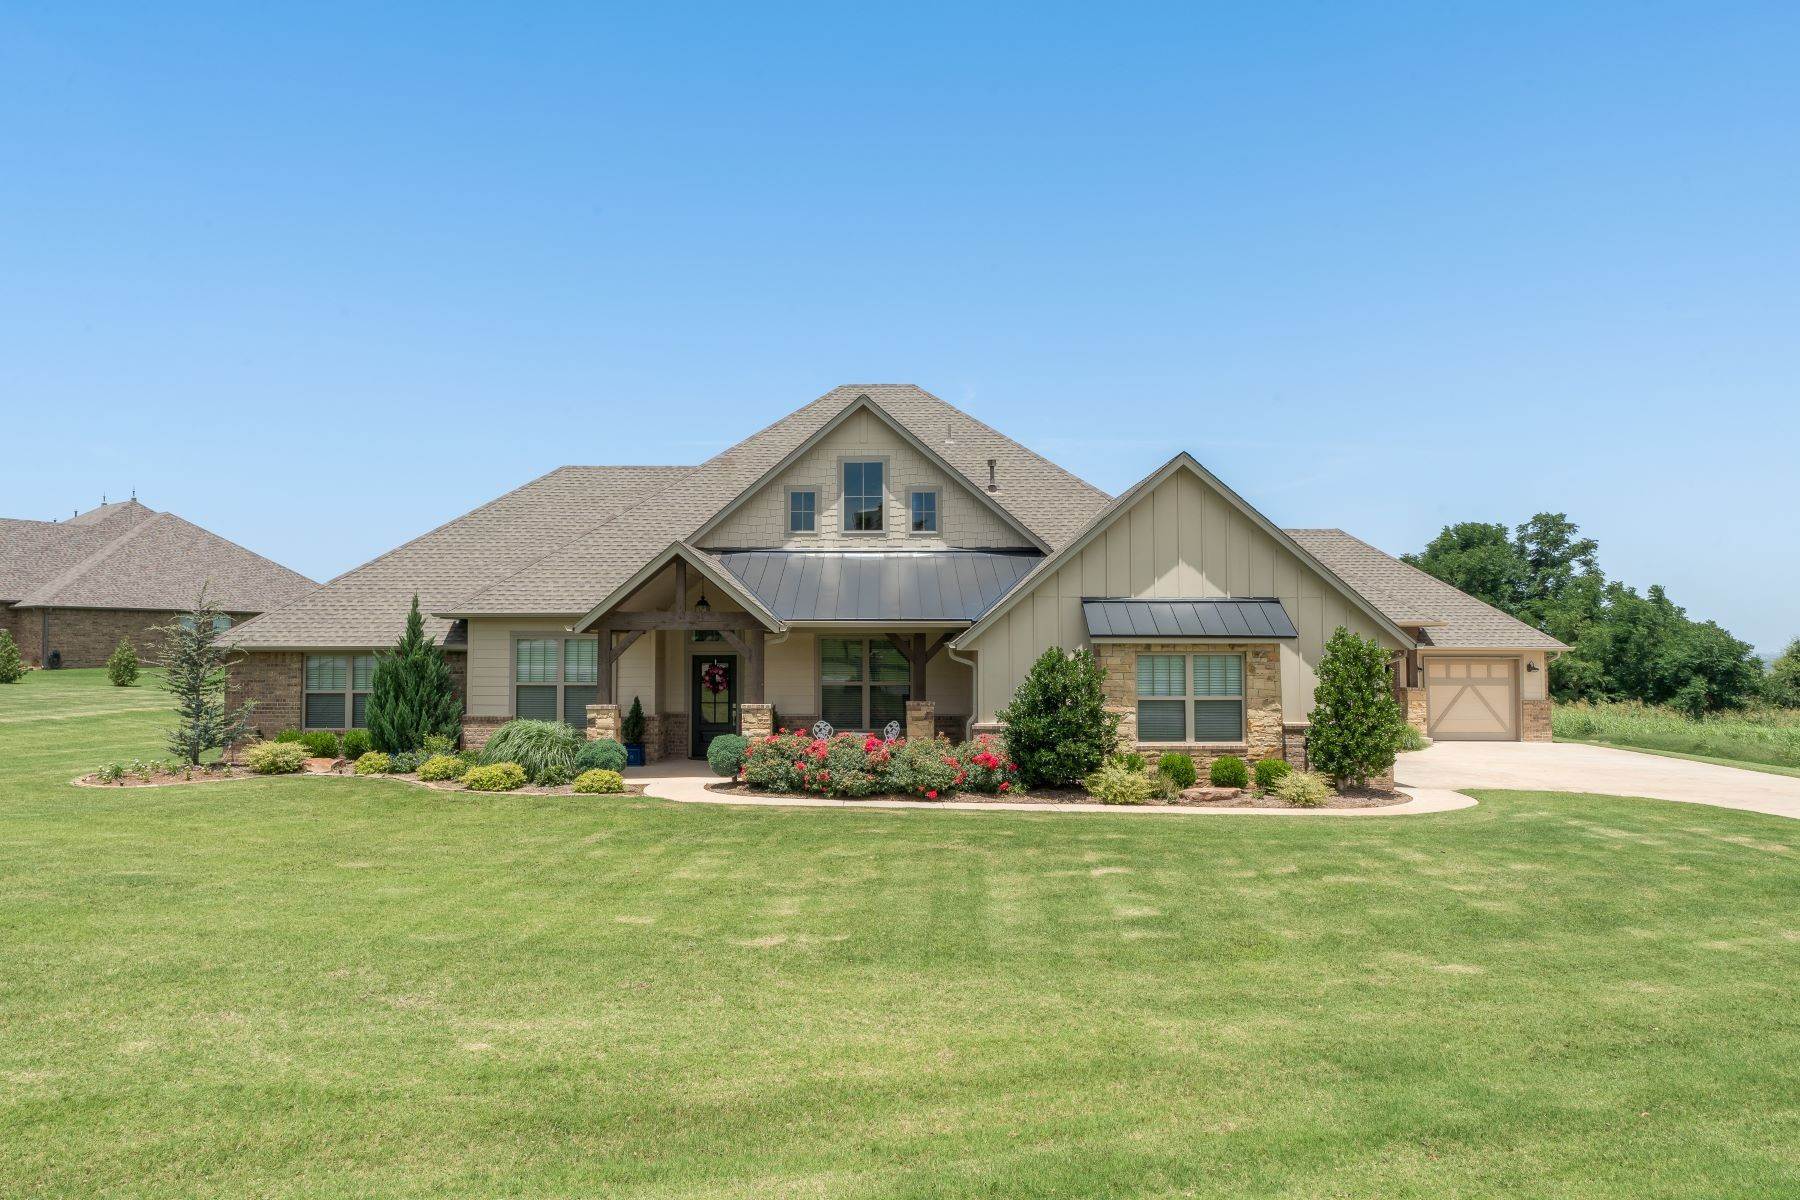 Single Family Homes for Sale at 3664 Riverfront Drive, Newcastle, OK 73065 3664 Riverfront Drive Newcastle, Oklahoma 73065 United States